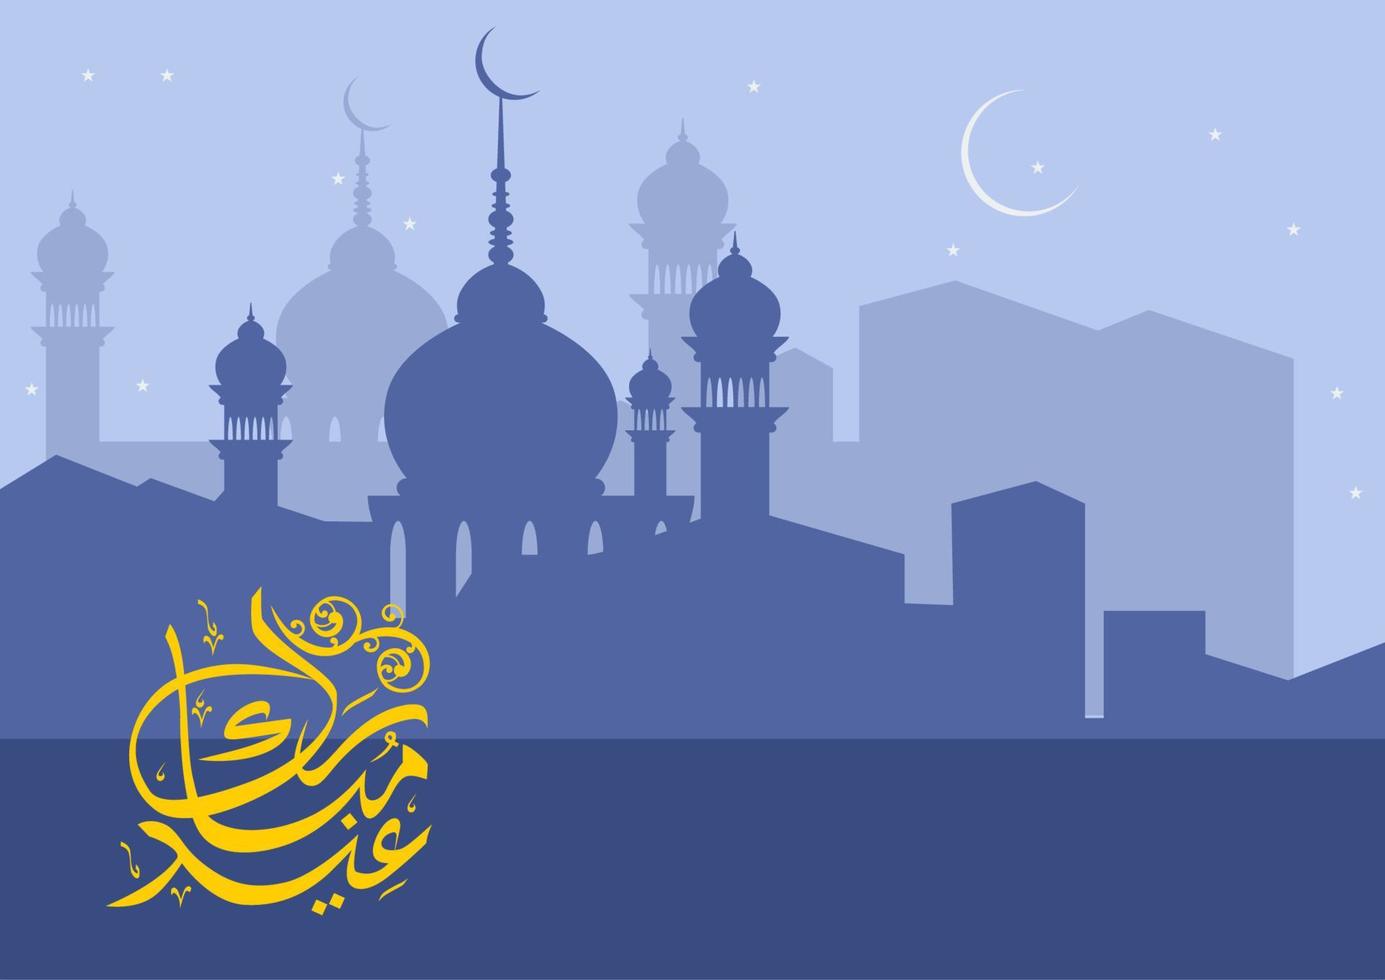 Editable Eid Mubarak Night Scene Vector Illustration with Mosque Silhouette and Arabic Calligraphy as Background for Islamic Moments